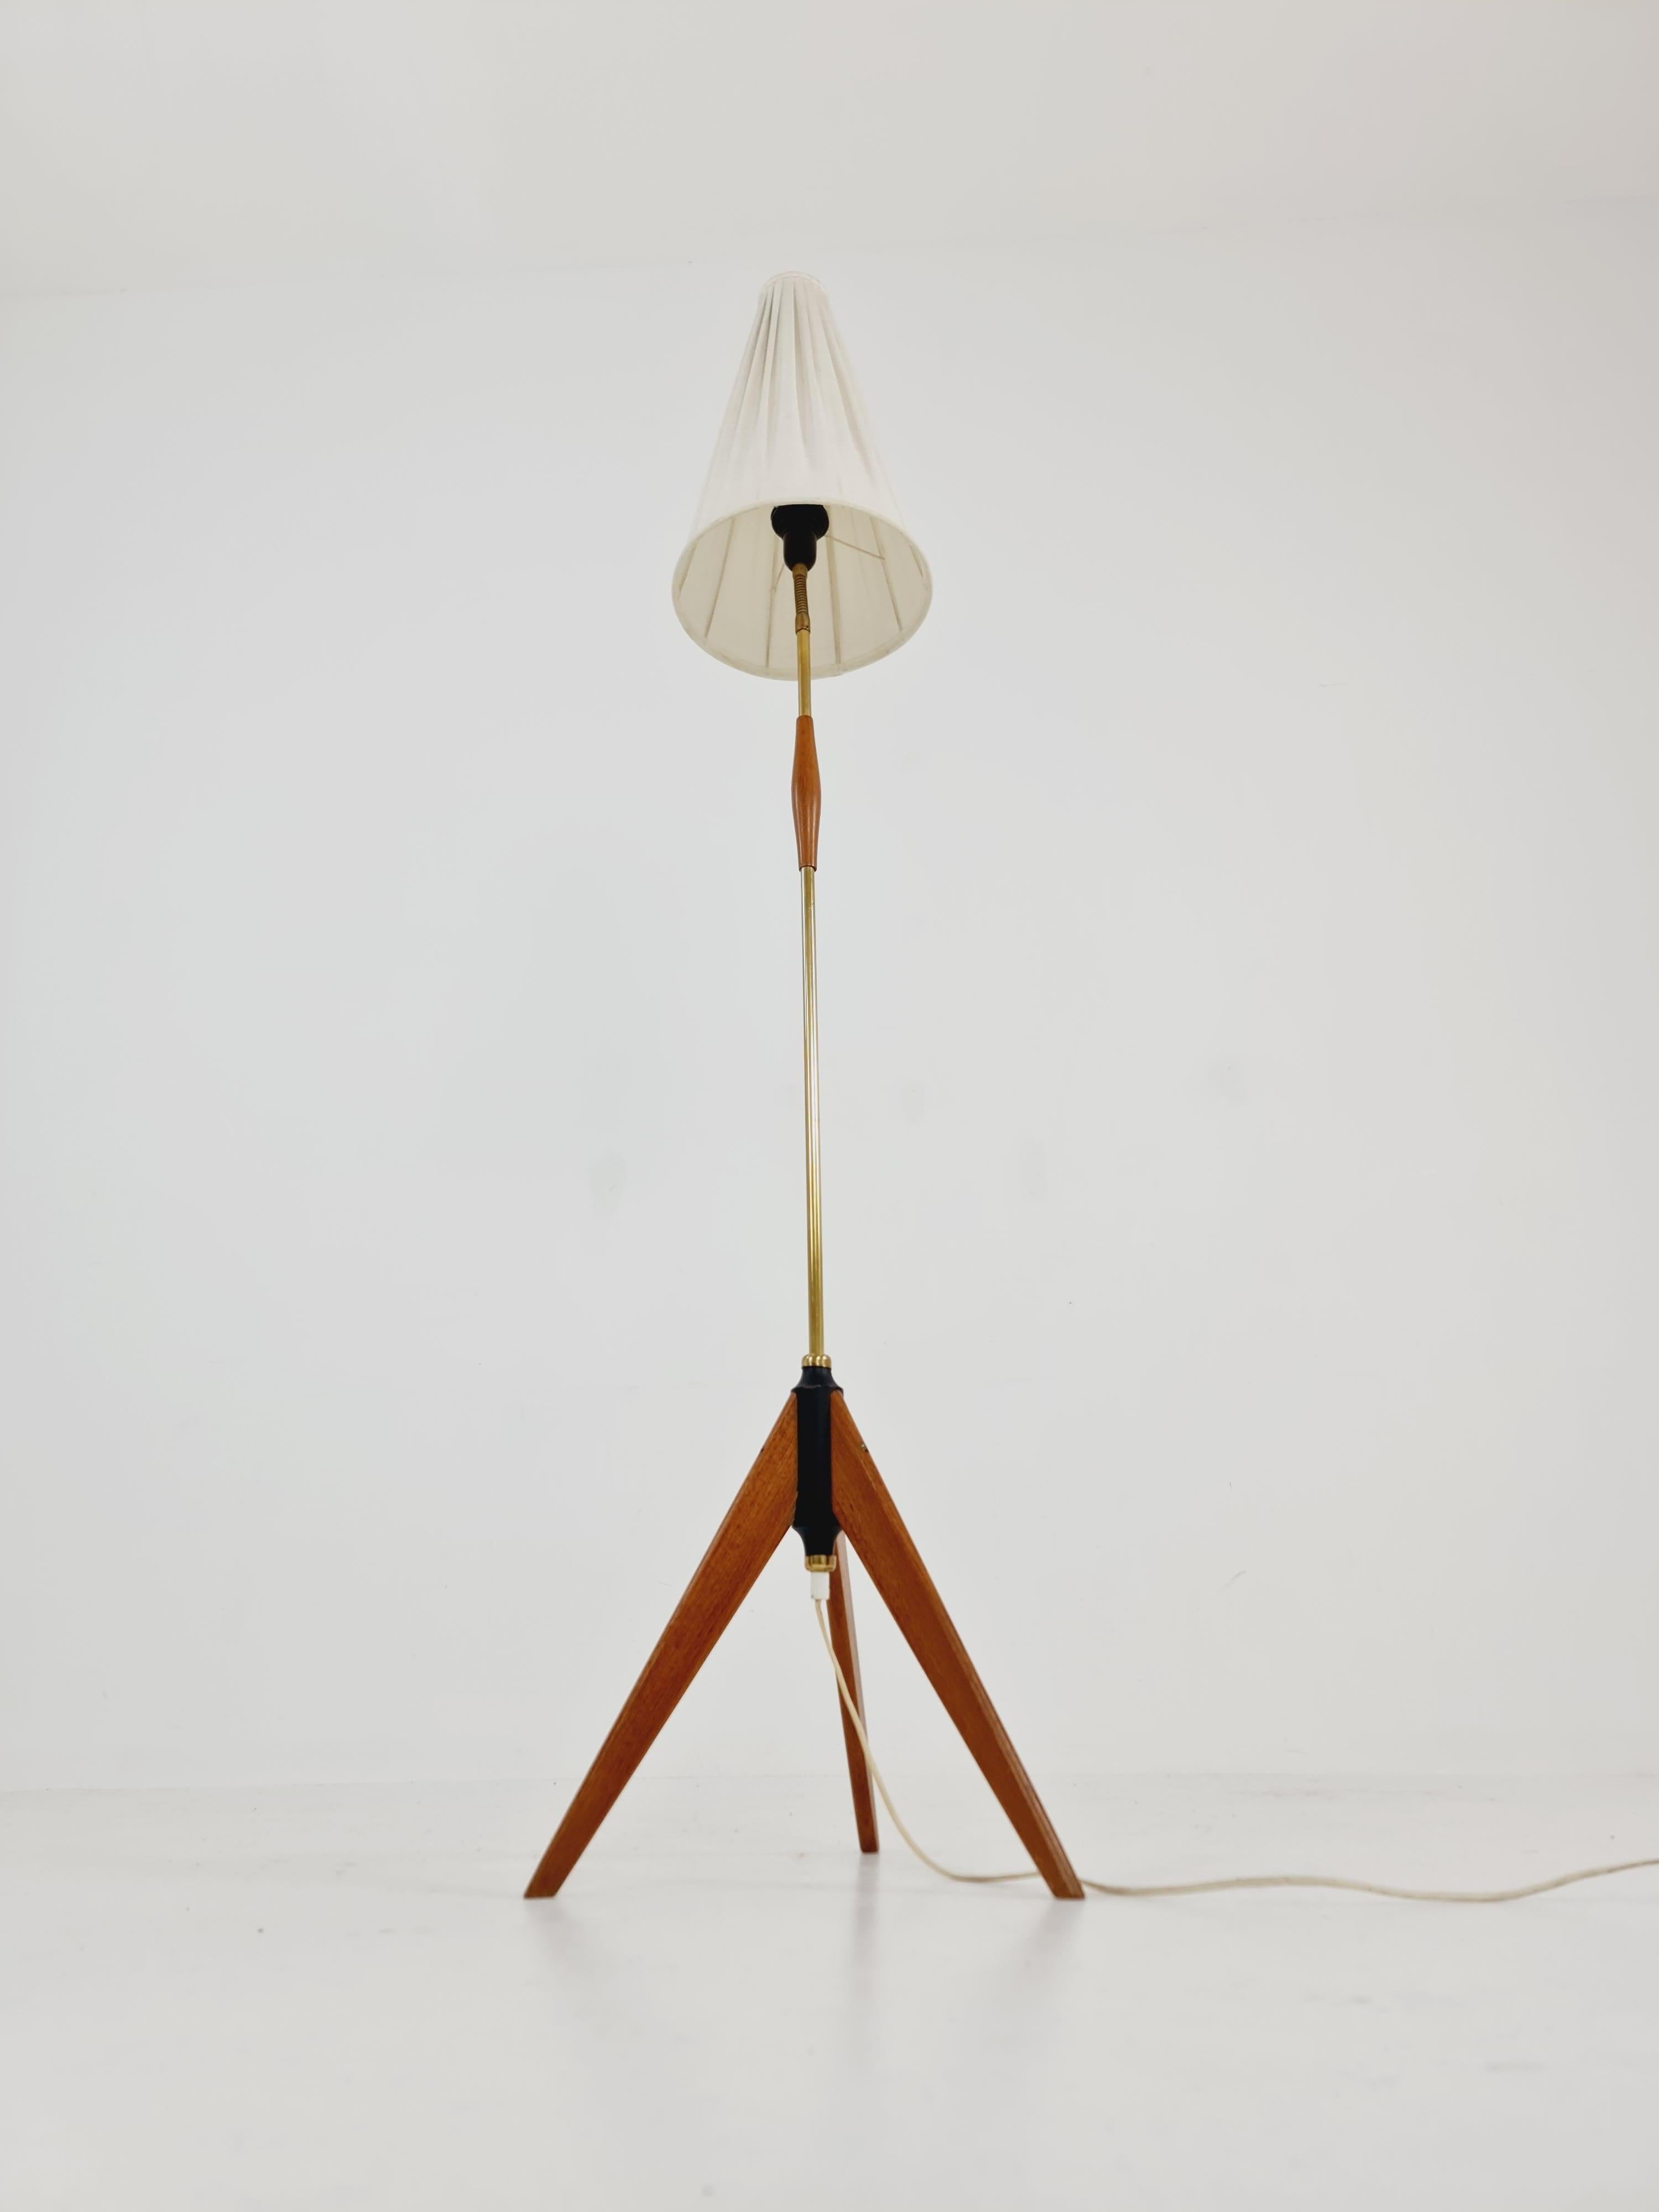 Midcentury floor Tripod flex armlamp brass & Teak Scandinavian by Örsjö Armatur, 1960s 

Shade made of fabric and lamp base of wood and brass details 

original Lamp shade is in a great vintage condition.

Design year: 1950/60s

Lamp Dimensions: 
39